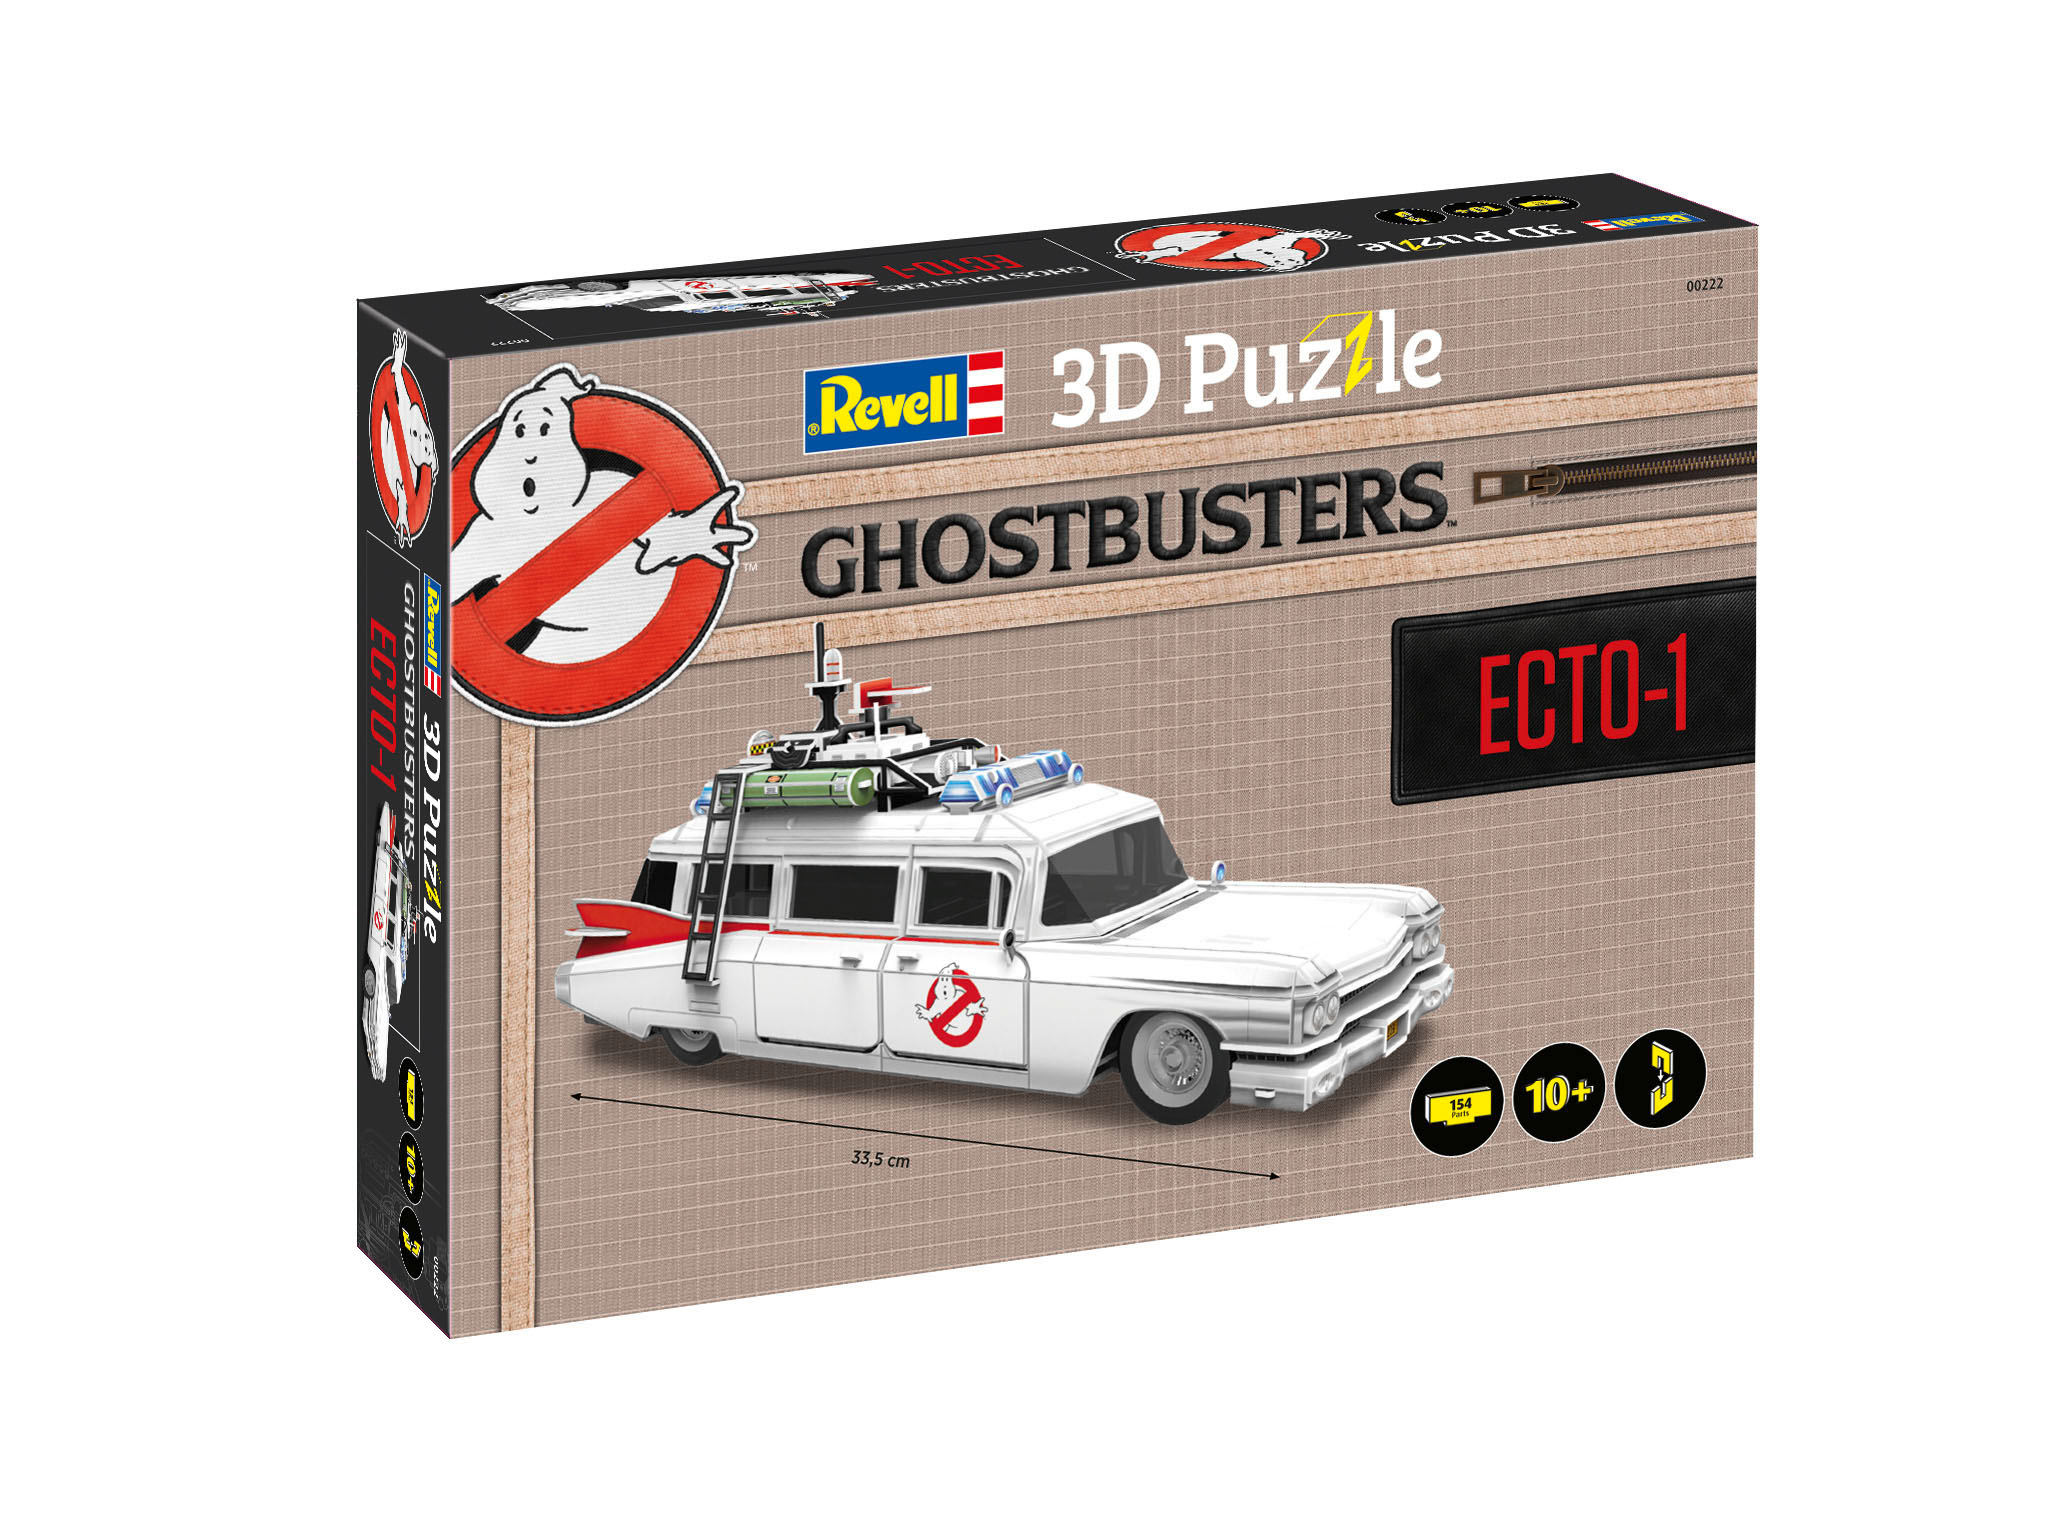 Ghostbusters Ecto-1 